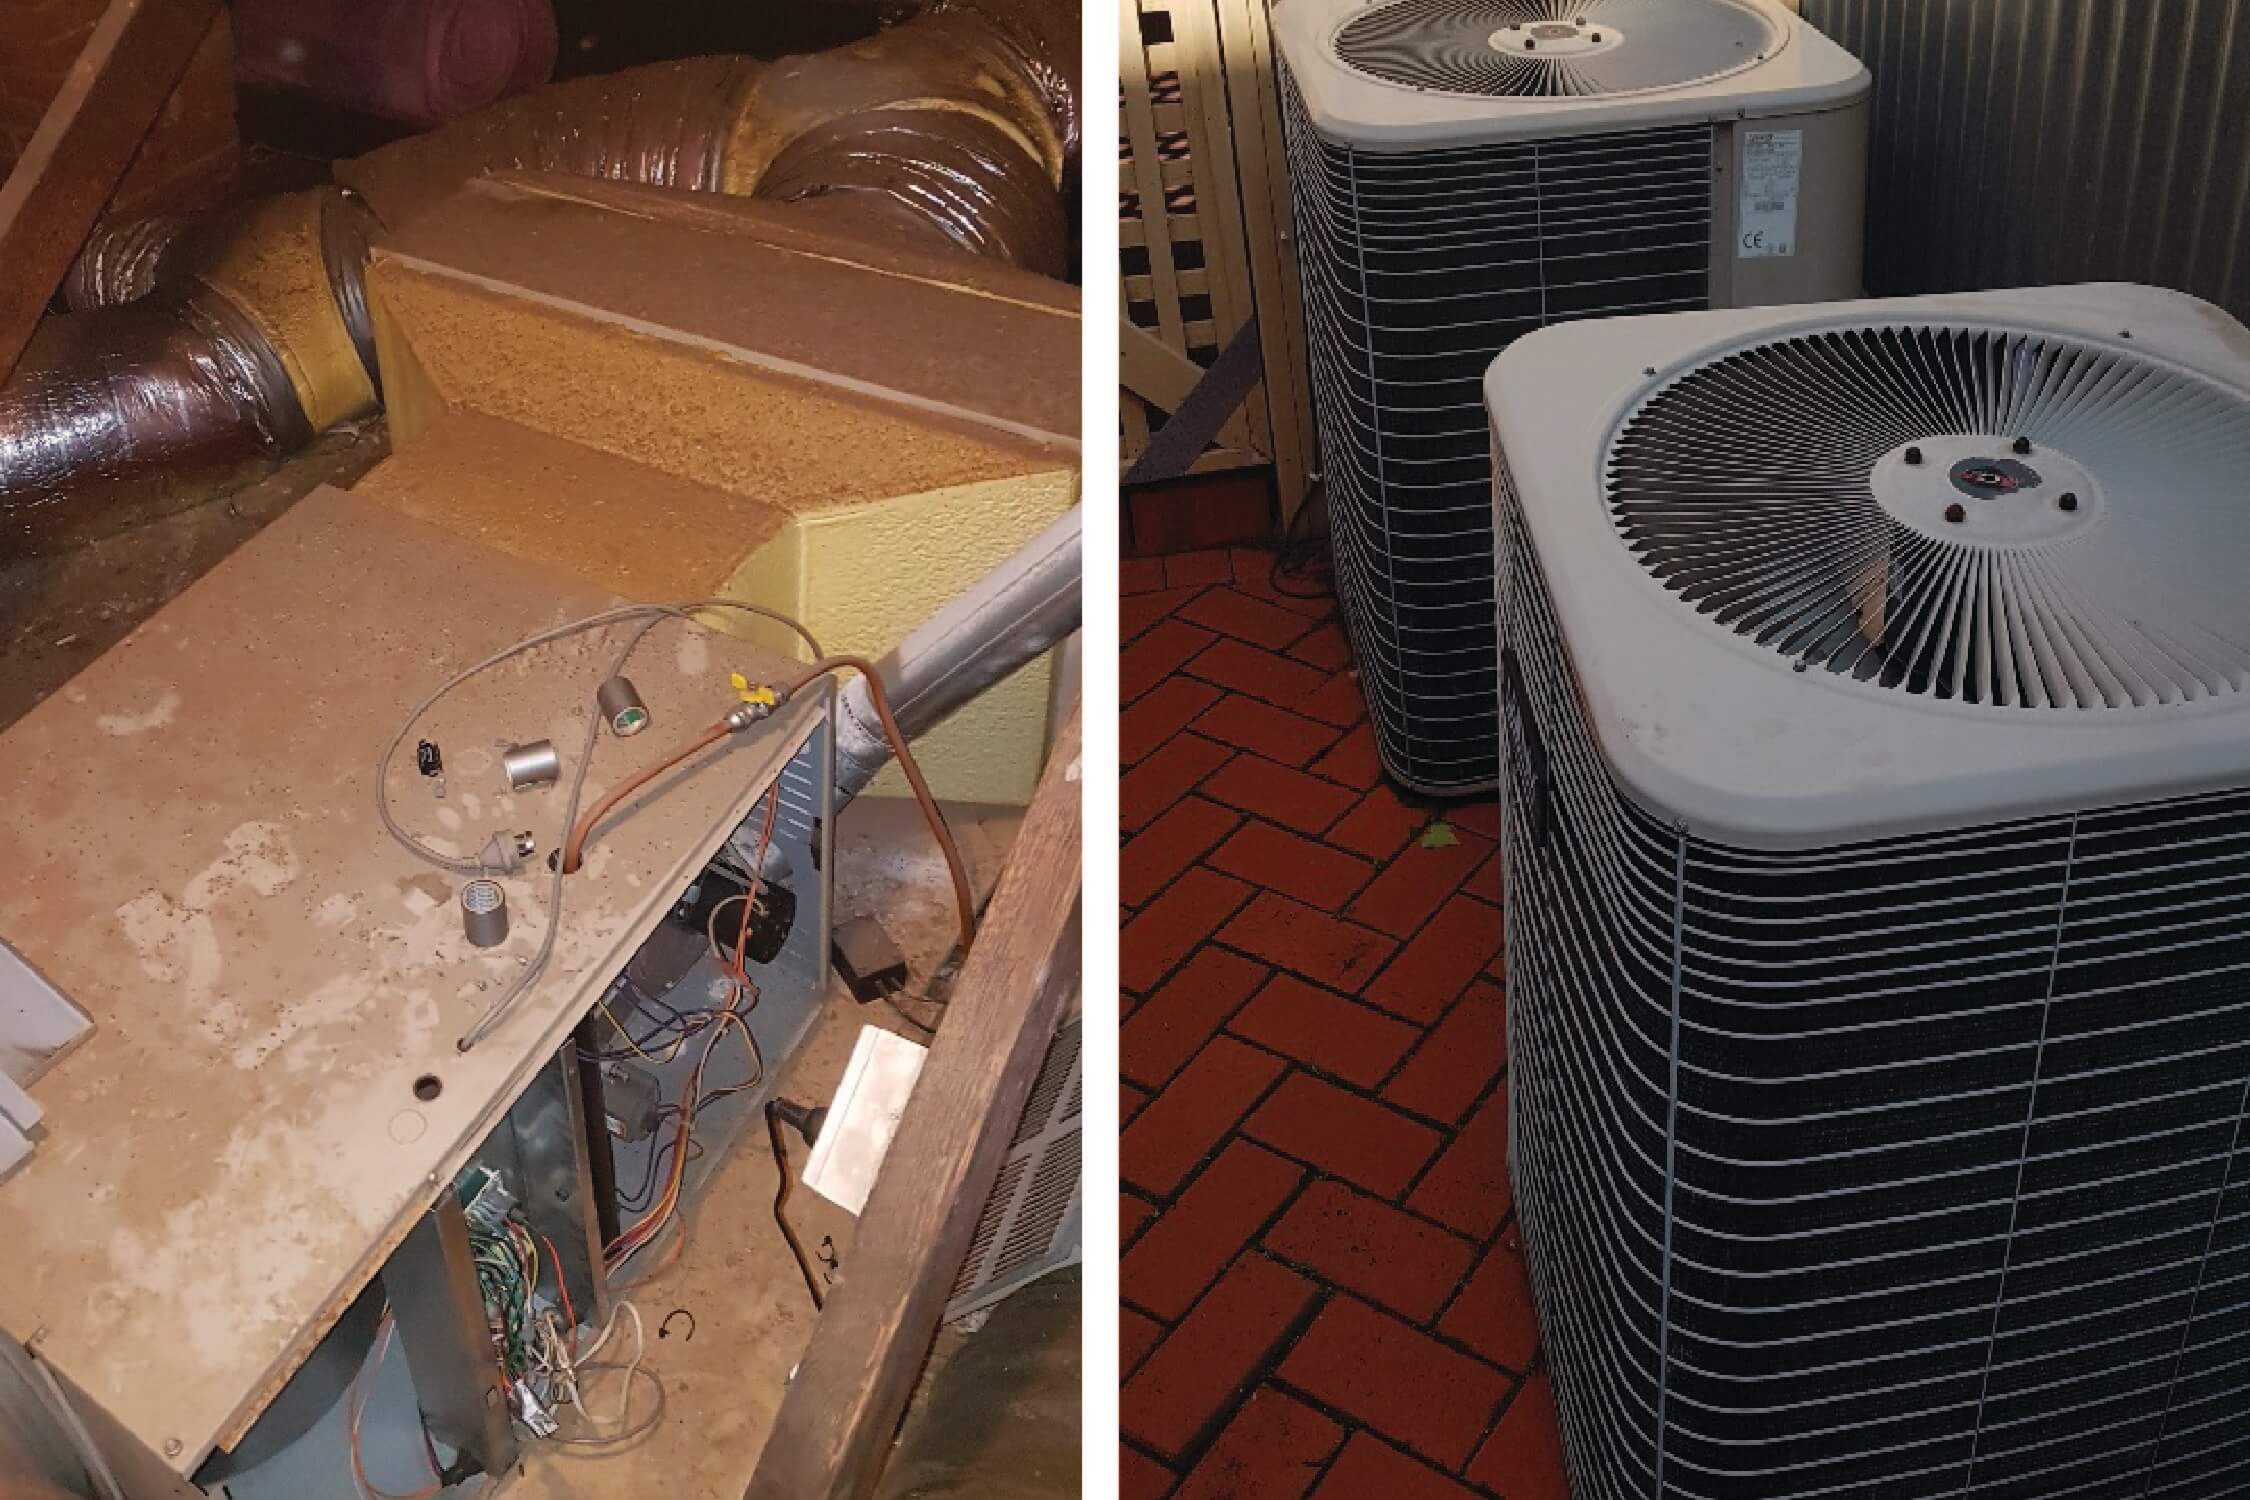 Decision time for gas heater